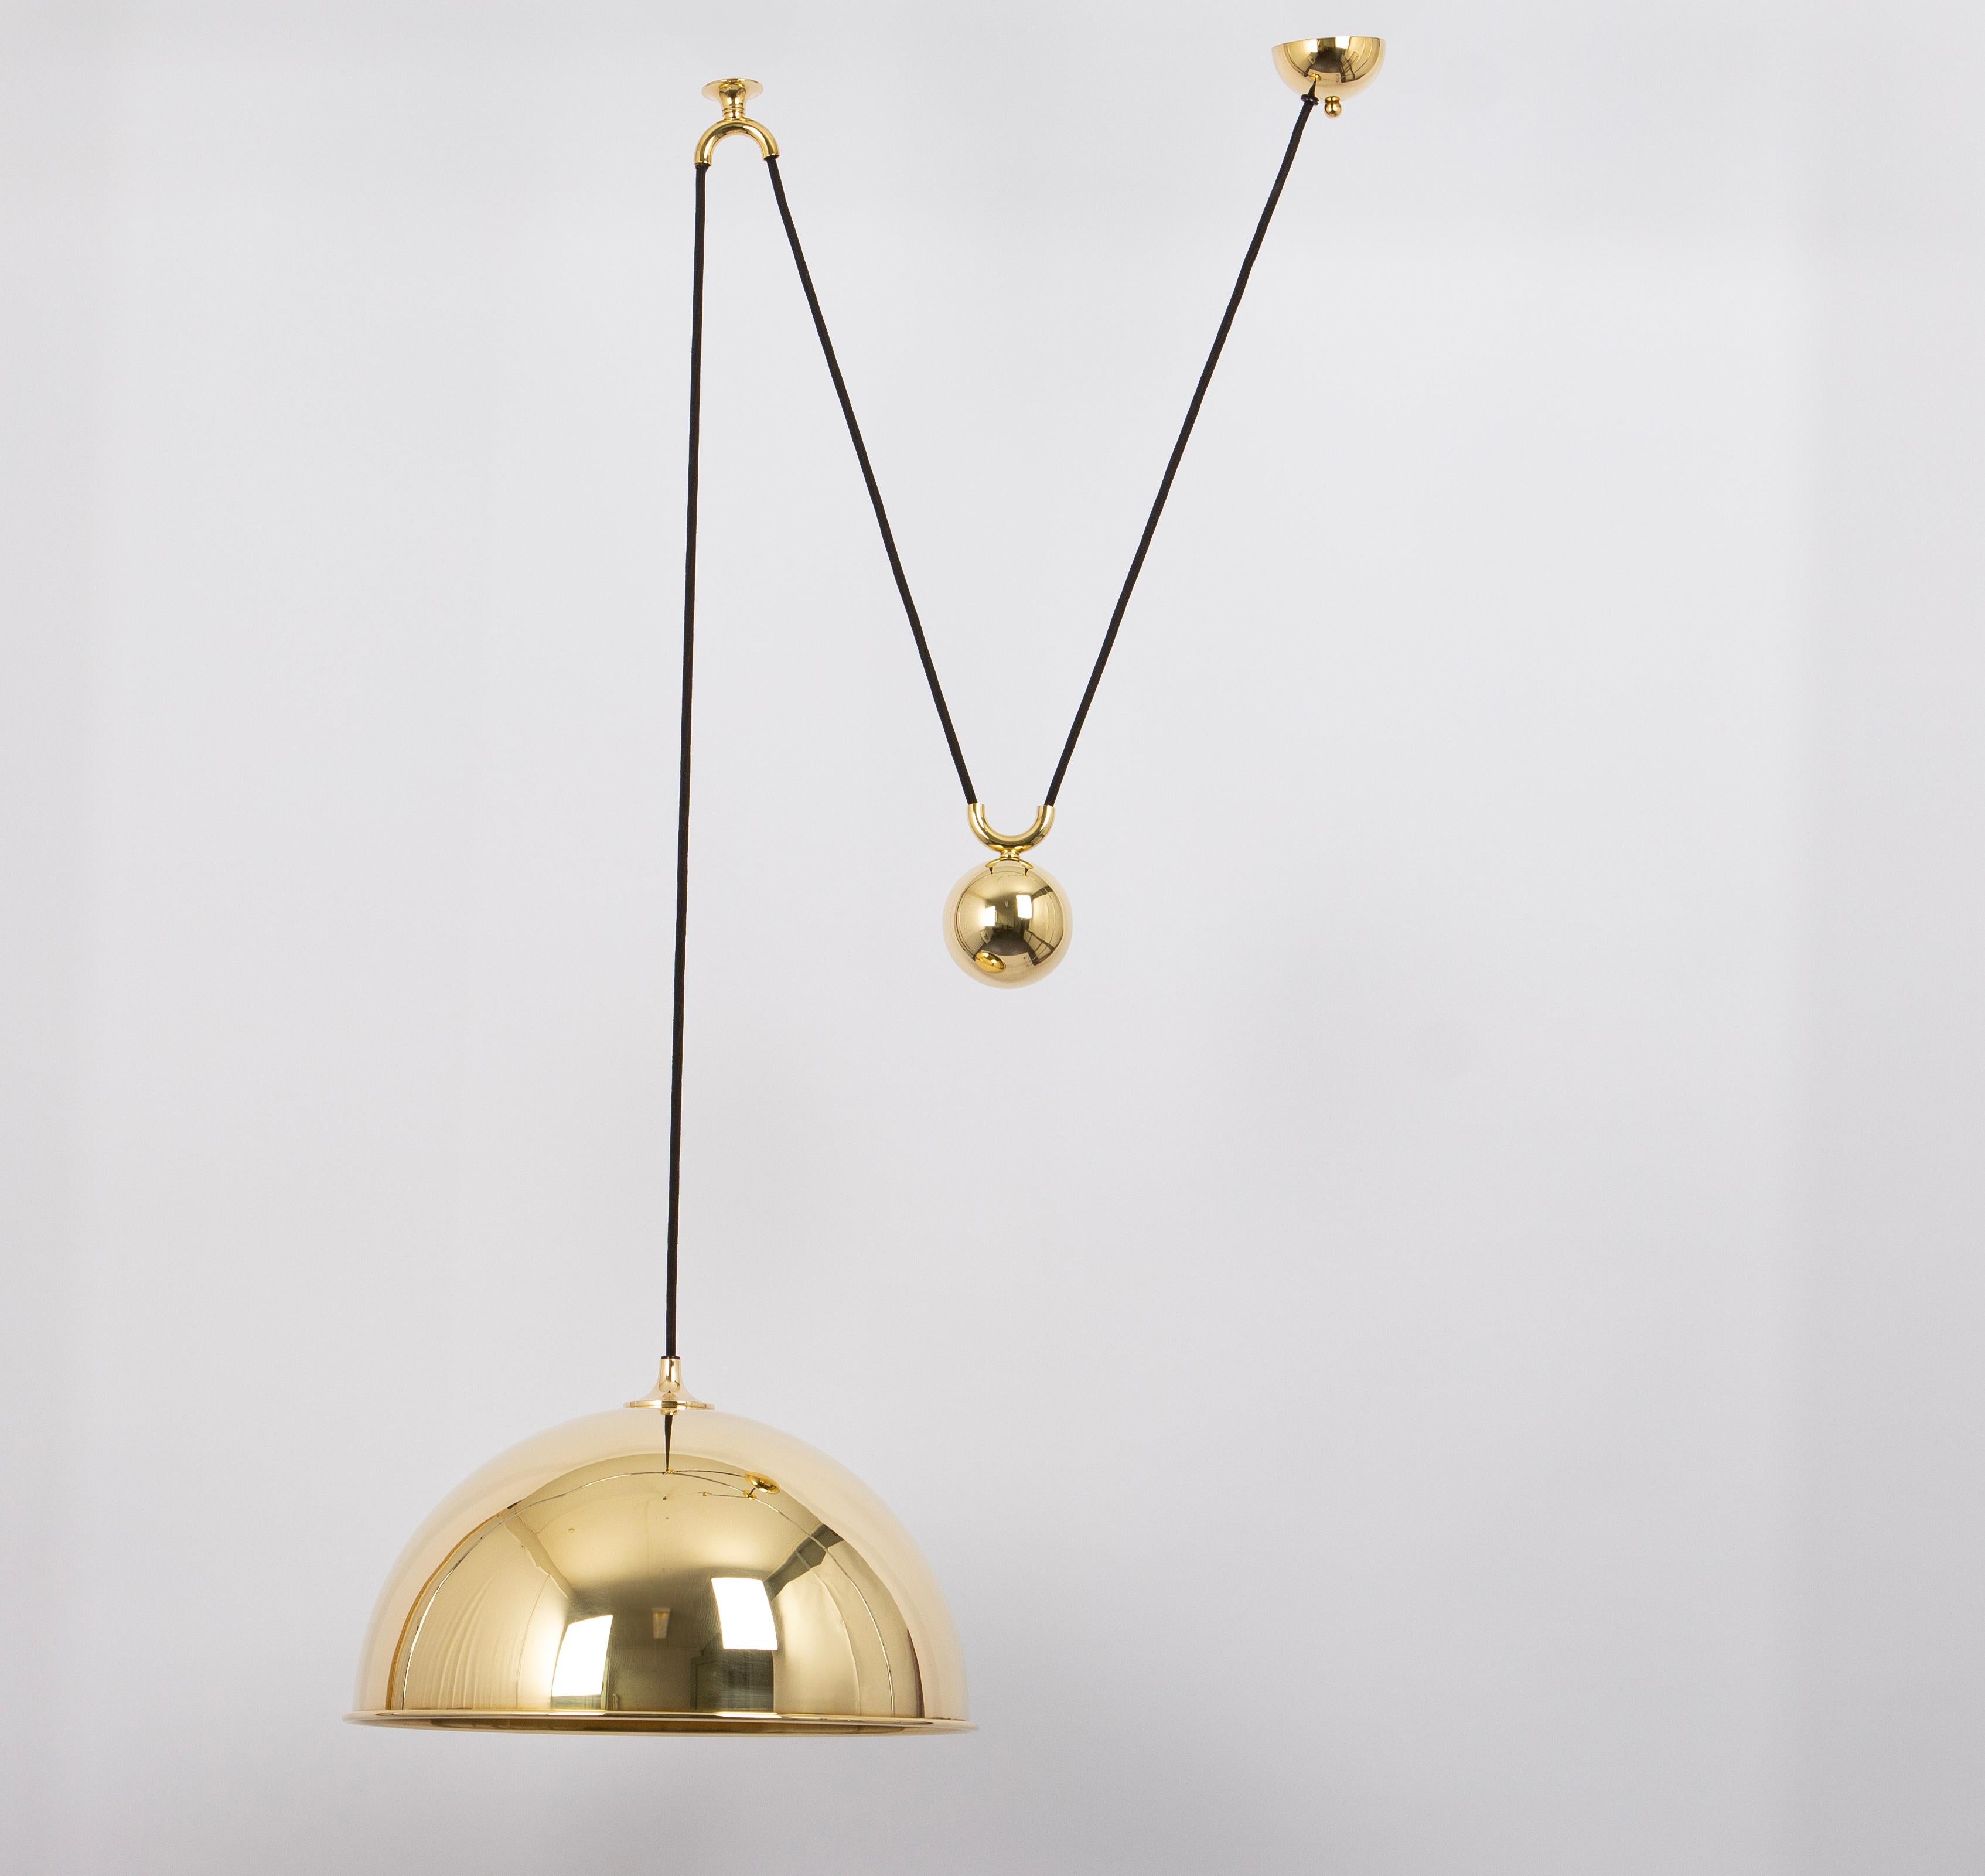 Stunning Posa brass pendant with adjustable counterweight designed by Florian Schulz, Germany, 1970s

One heavy metal ball counterweight and one brass dome. Cloth cord.
Good vintage condition, with small signs of age and use. Height is